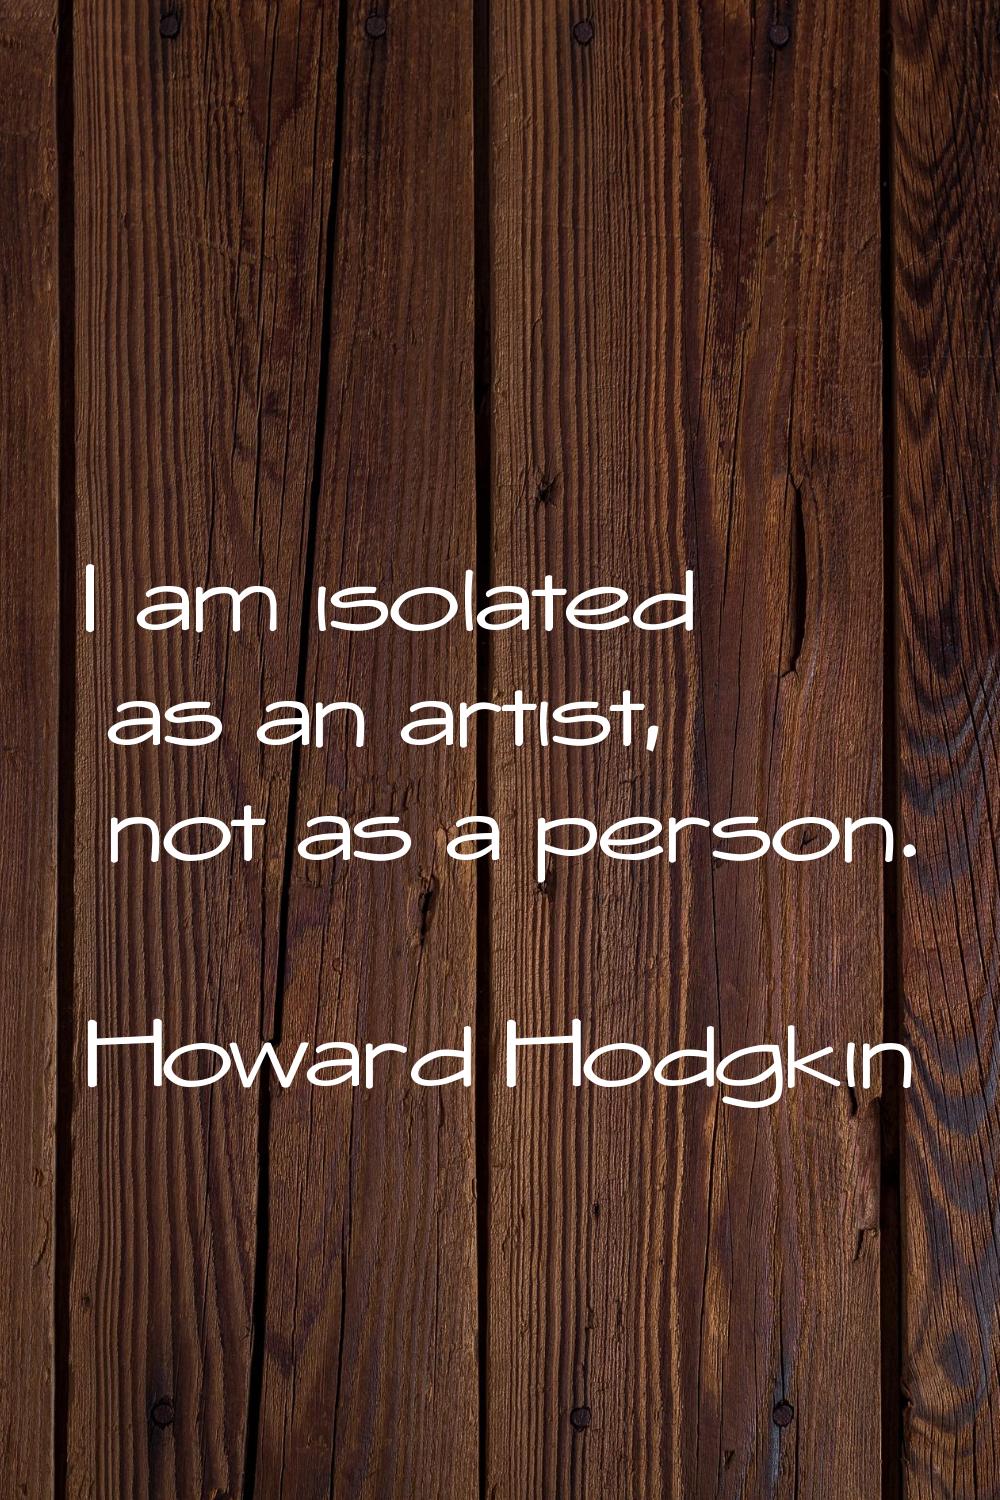 I am isolated as an artist, not as a person.